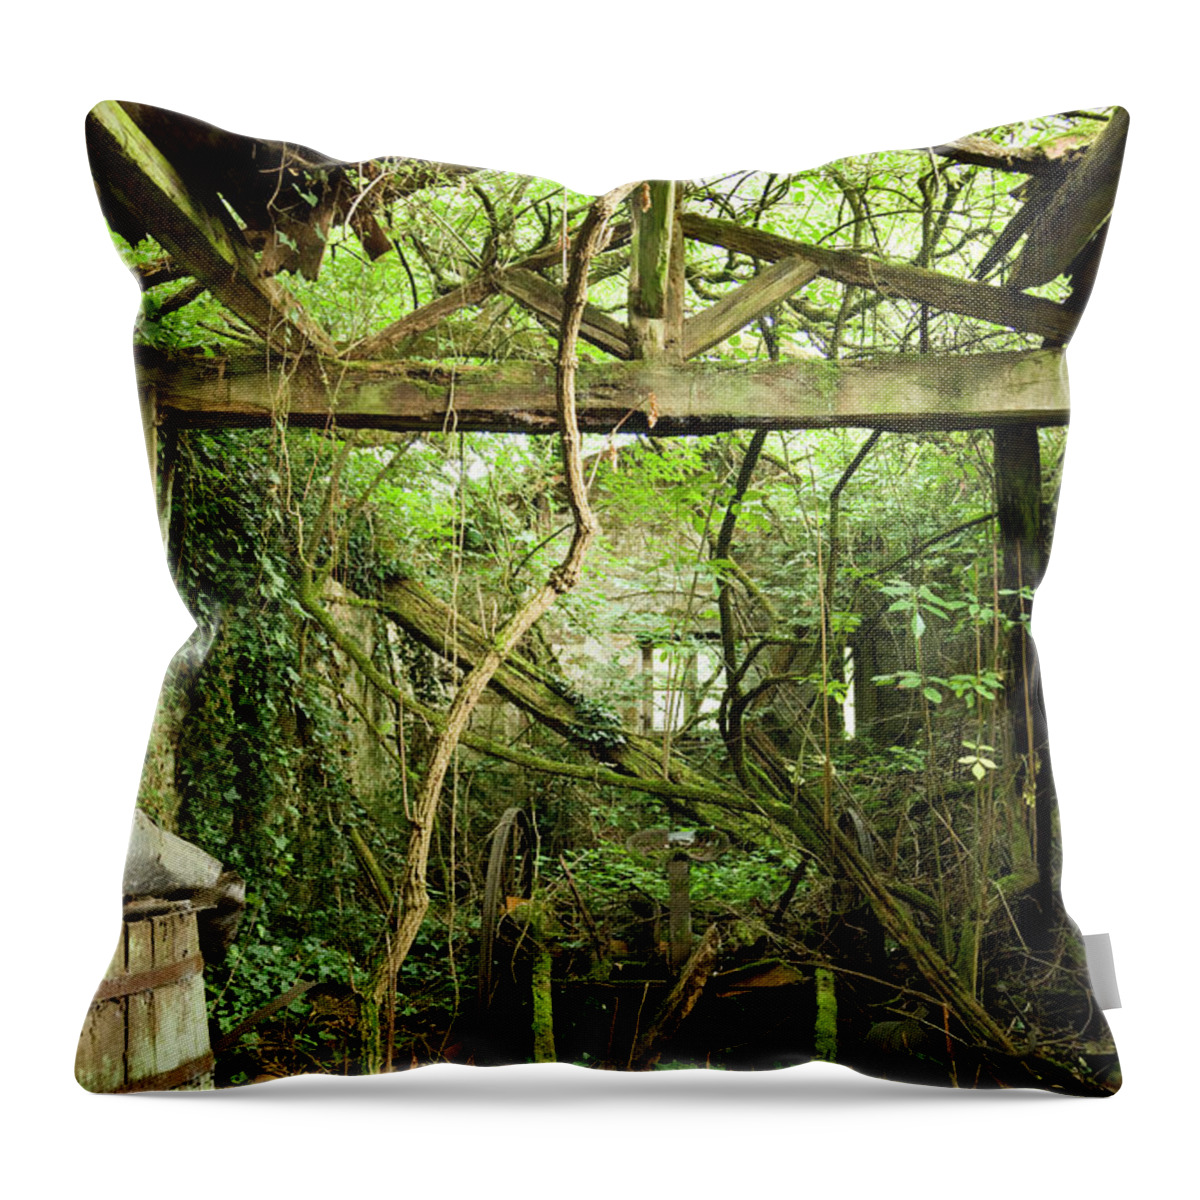 Horror Throw Pillow featuring the photograph Abandonment by Digiclicks